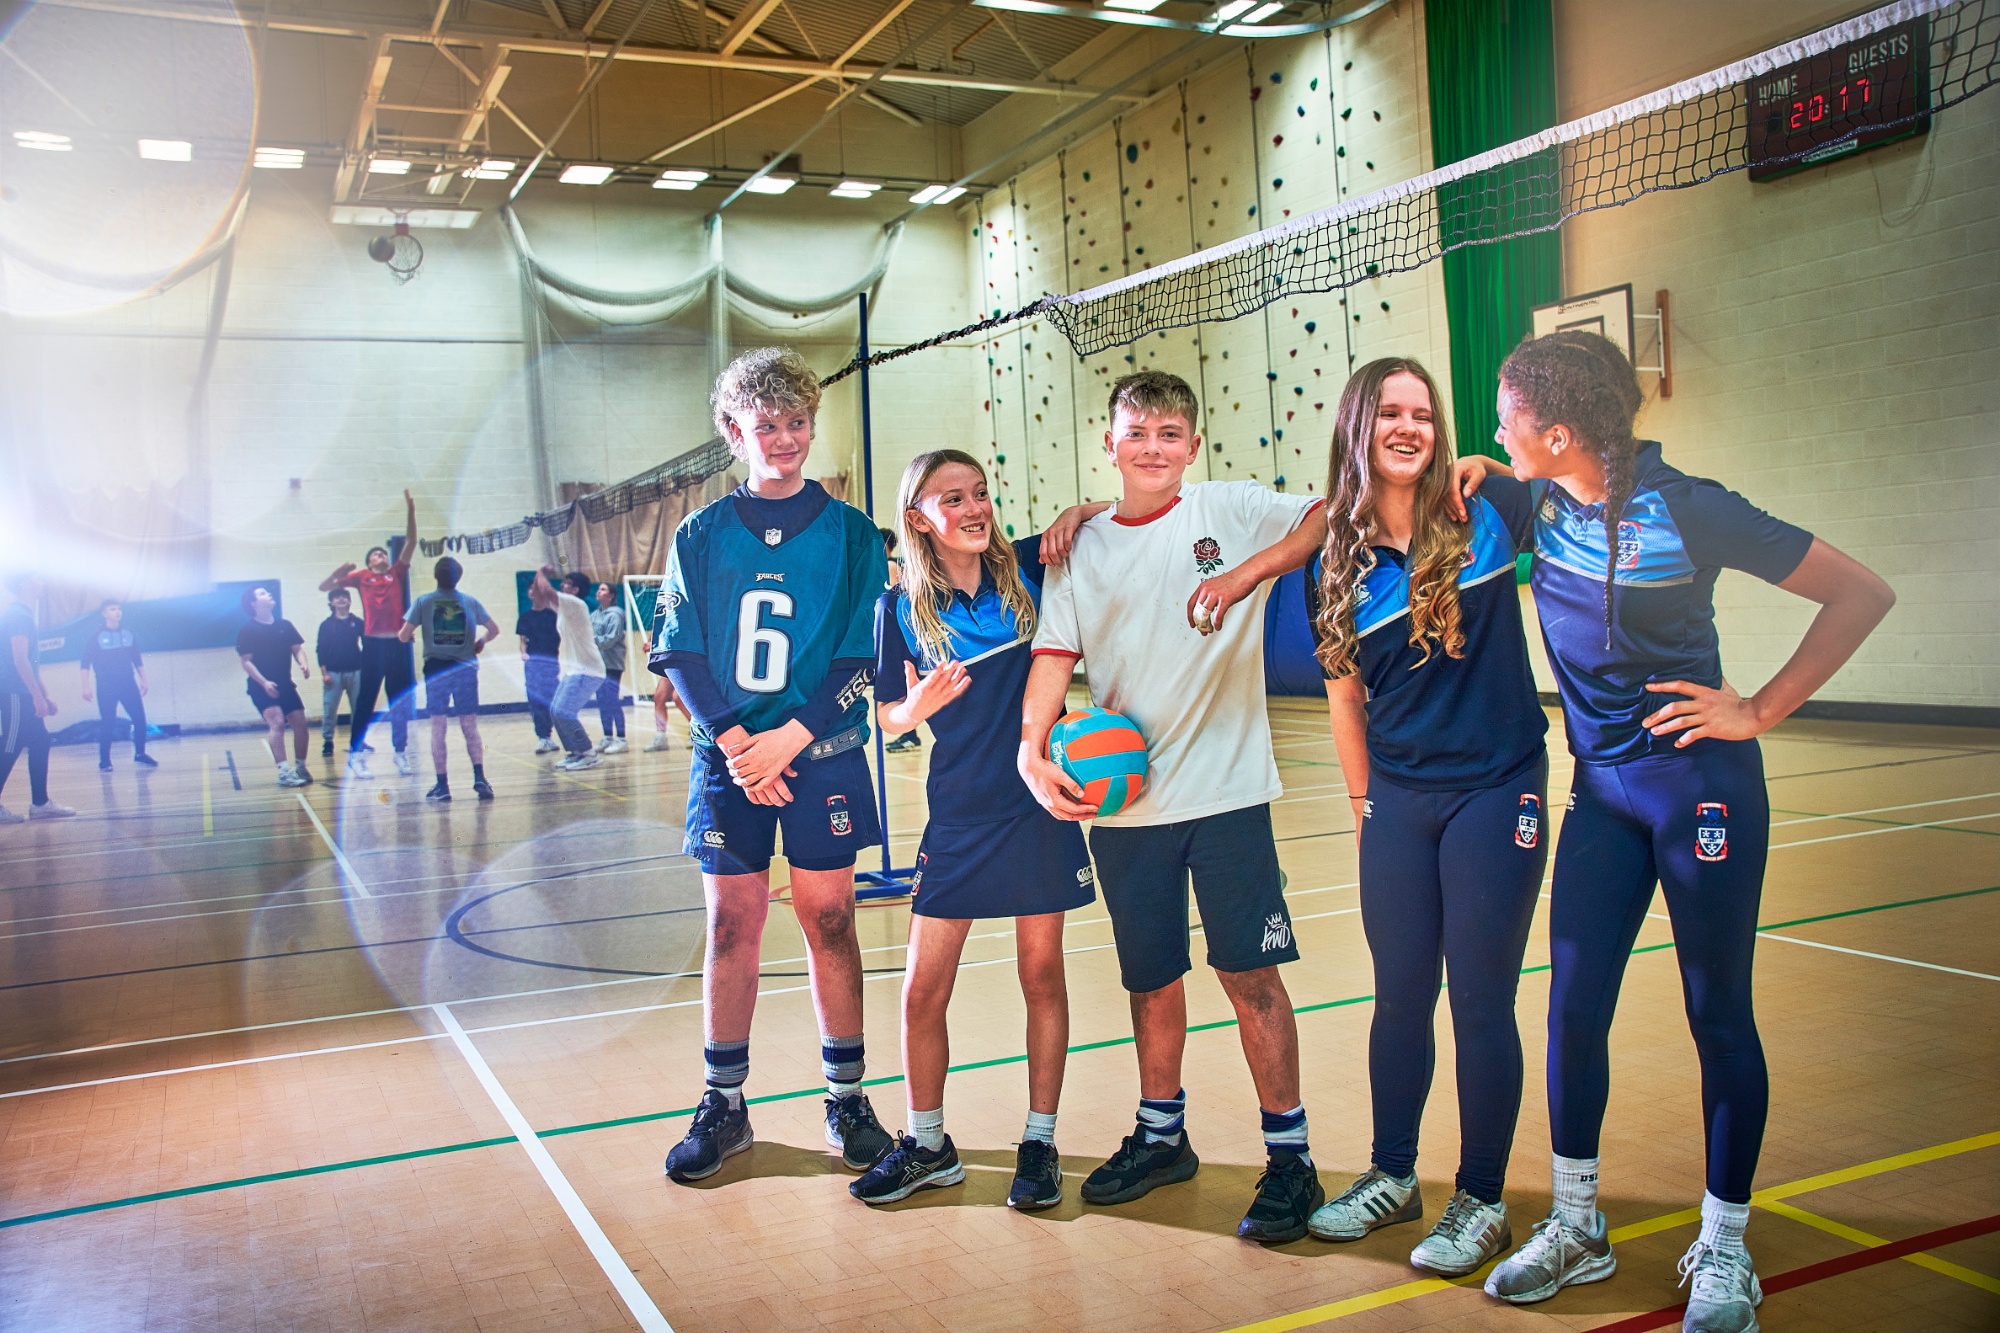 Five students, boys and girls, in the sports hall holding a volleyball, leaning on each other and chatting